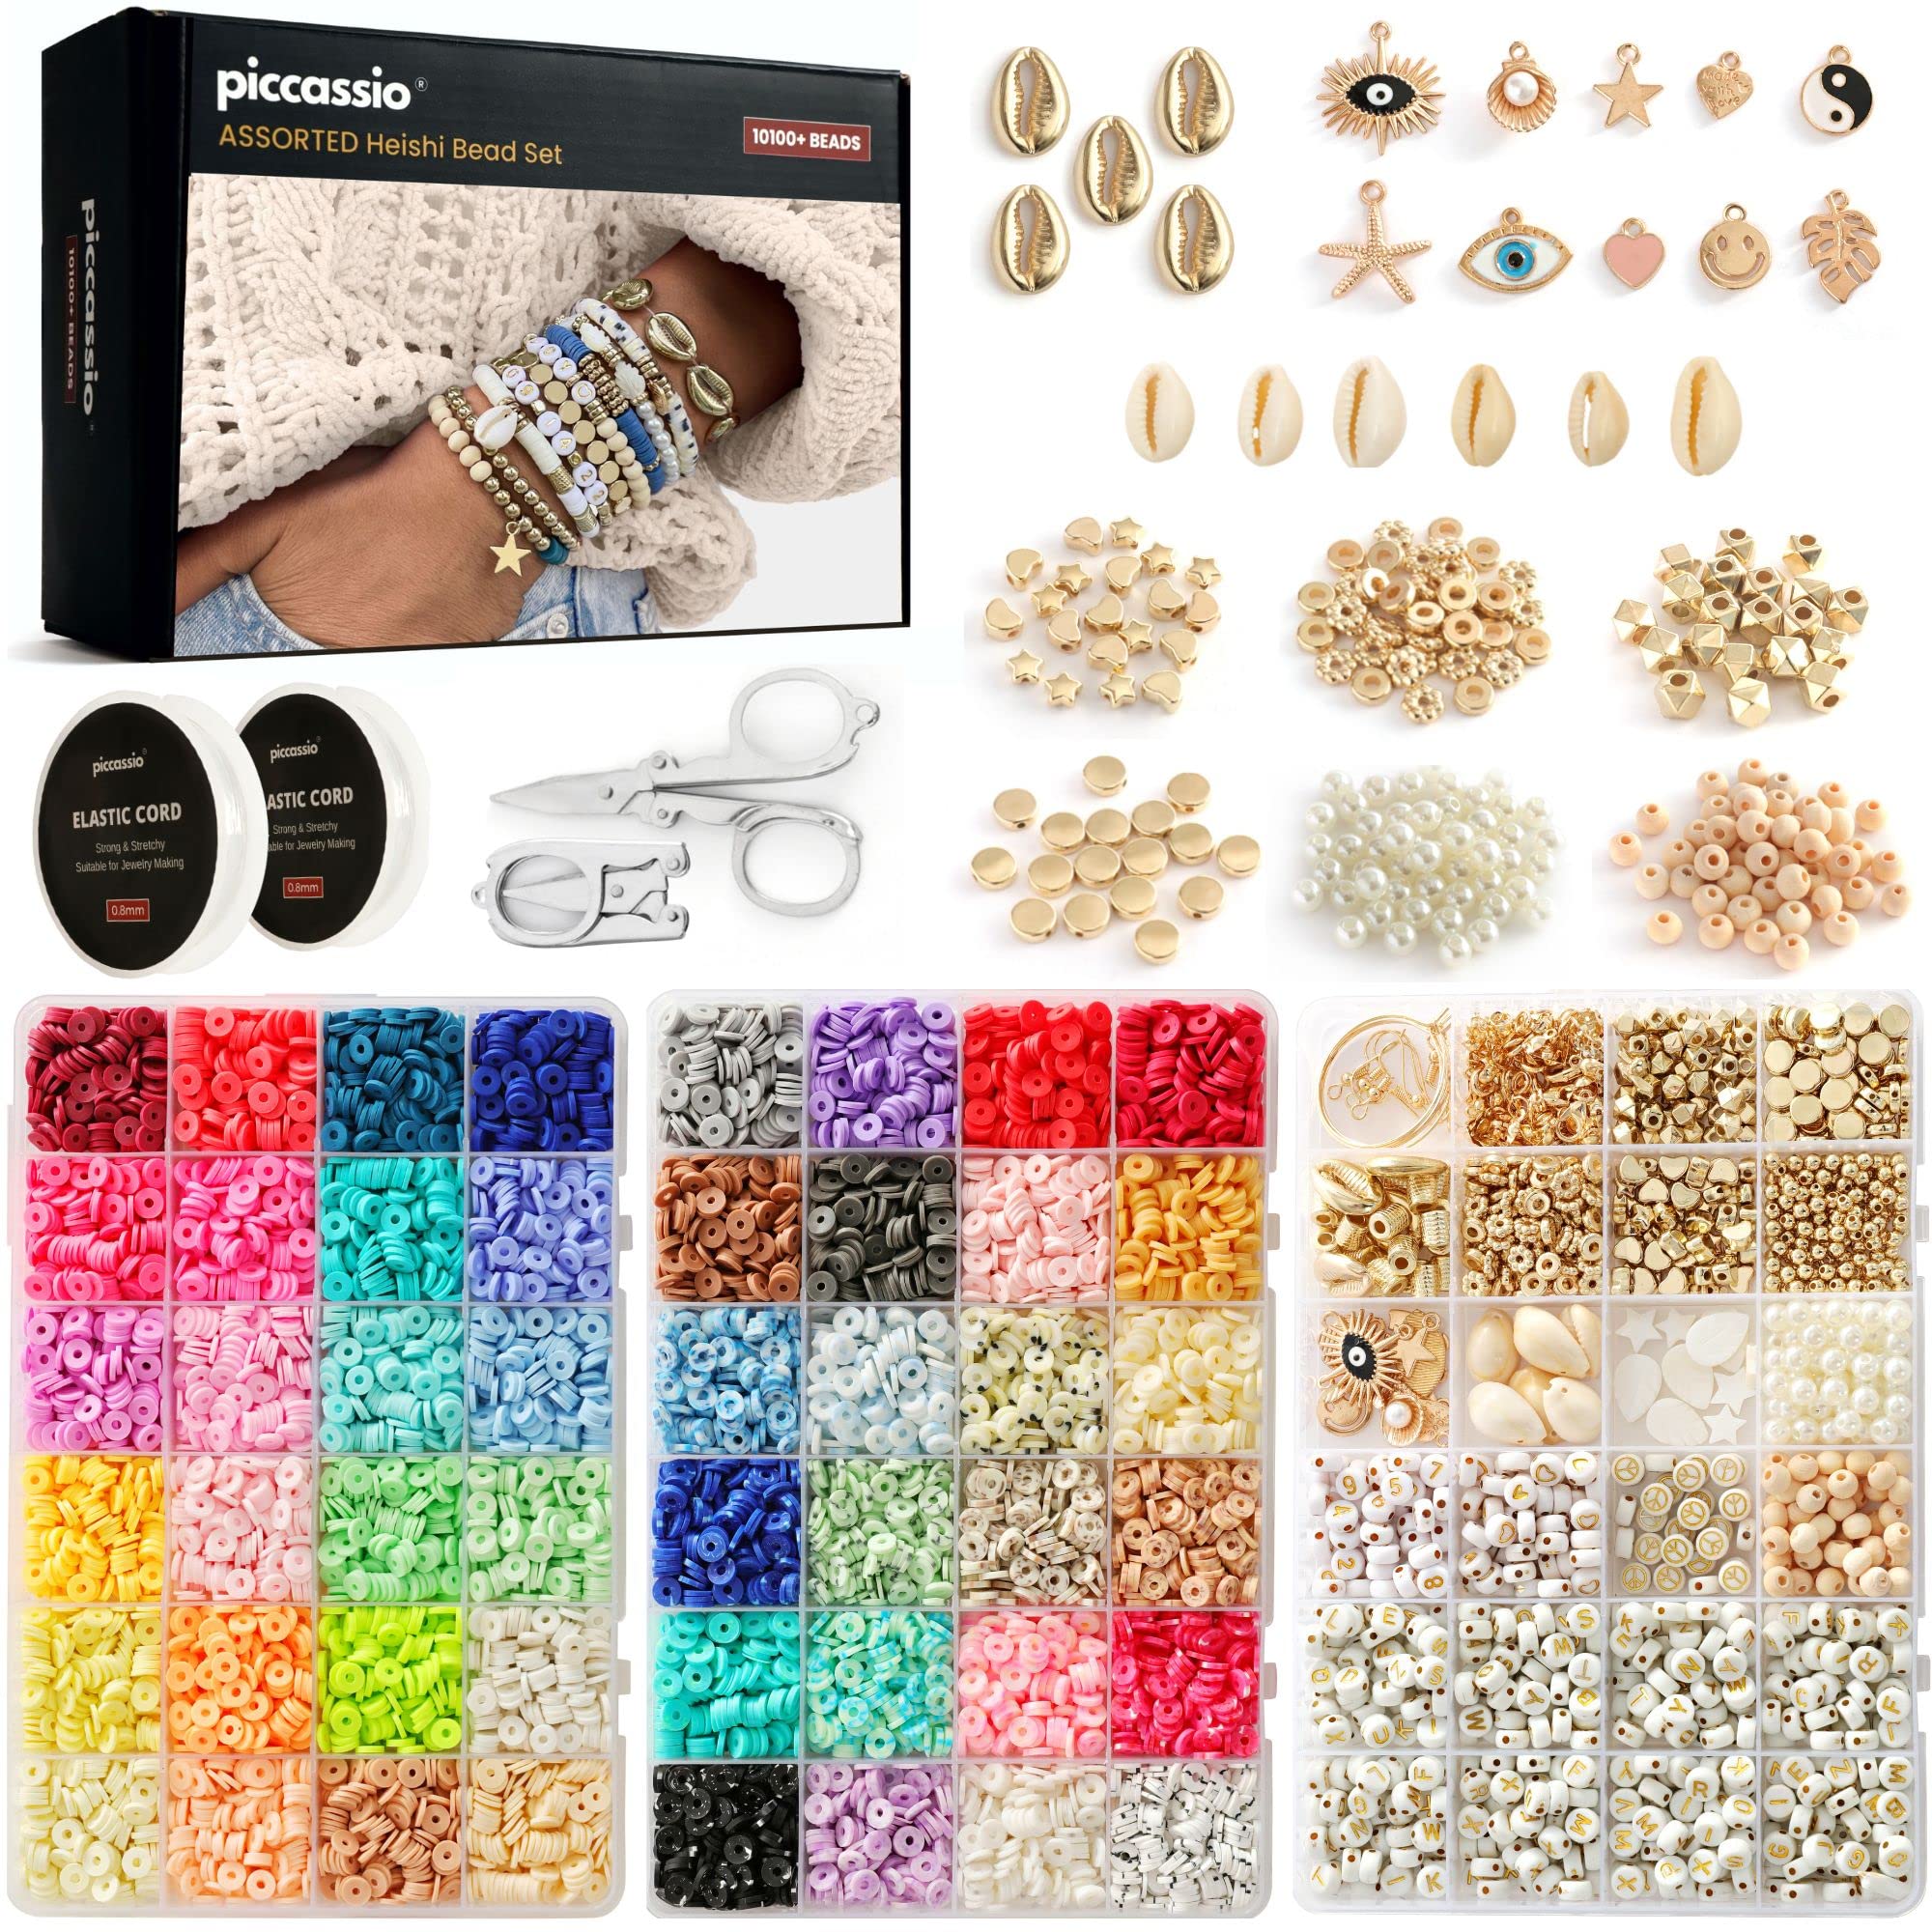 Heishi 10500+ pcs Polymerclay beads for bracelets and Jewelry making kit -  for Girls and Adults - Preppy